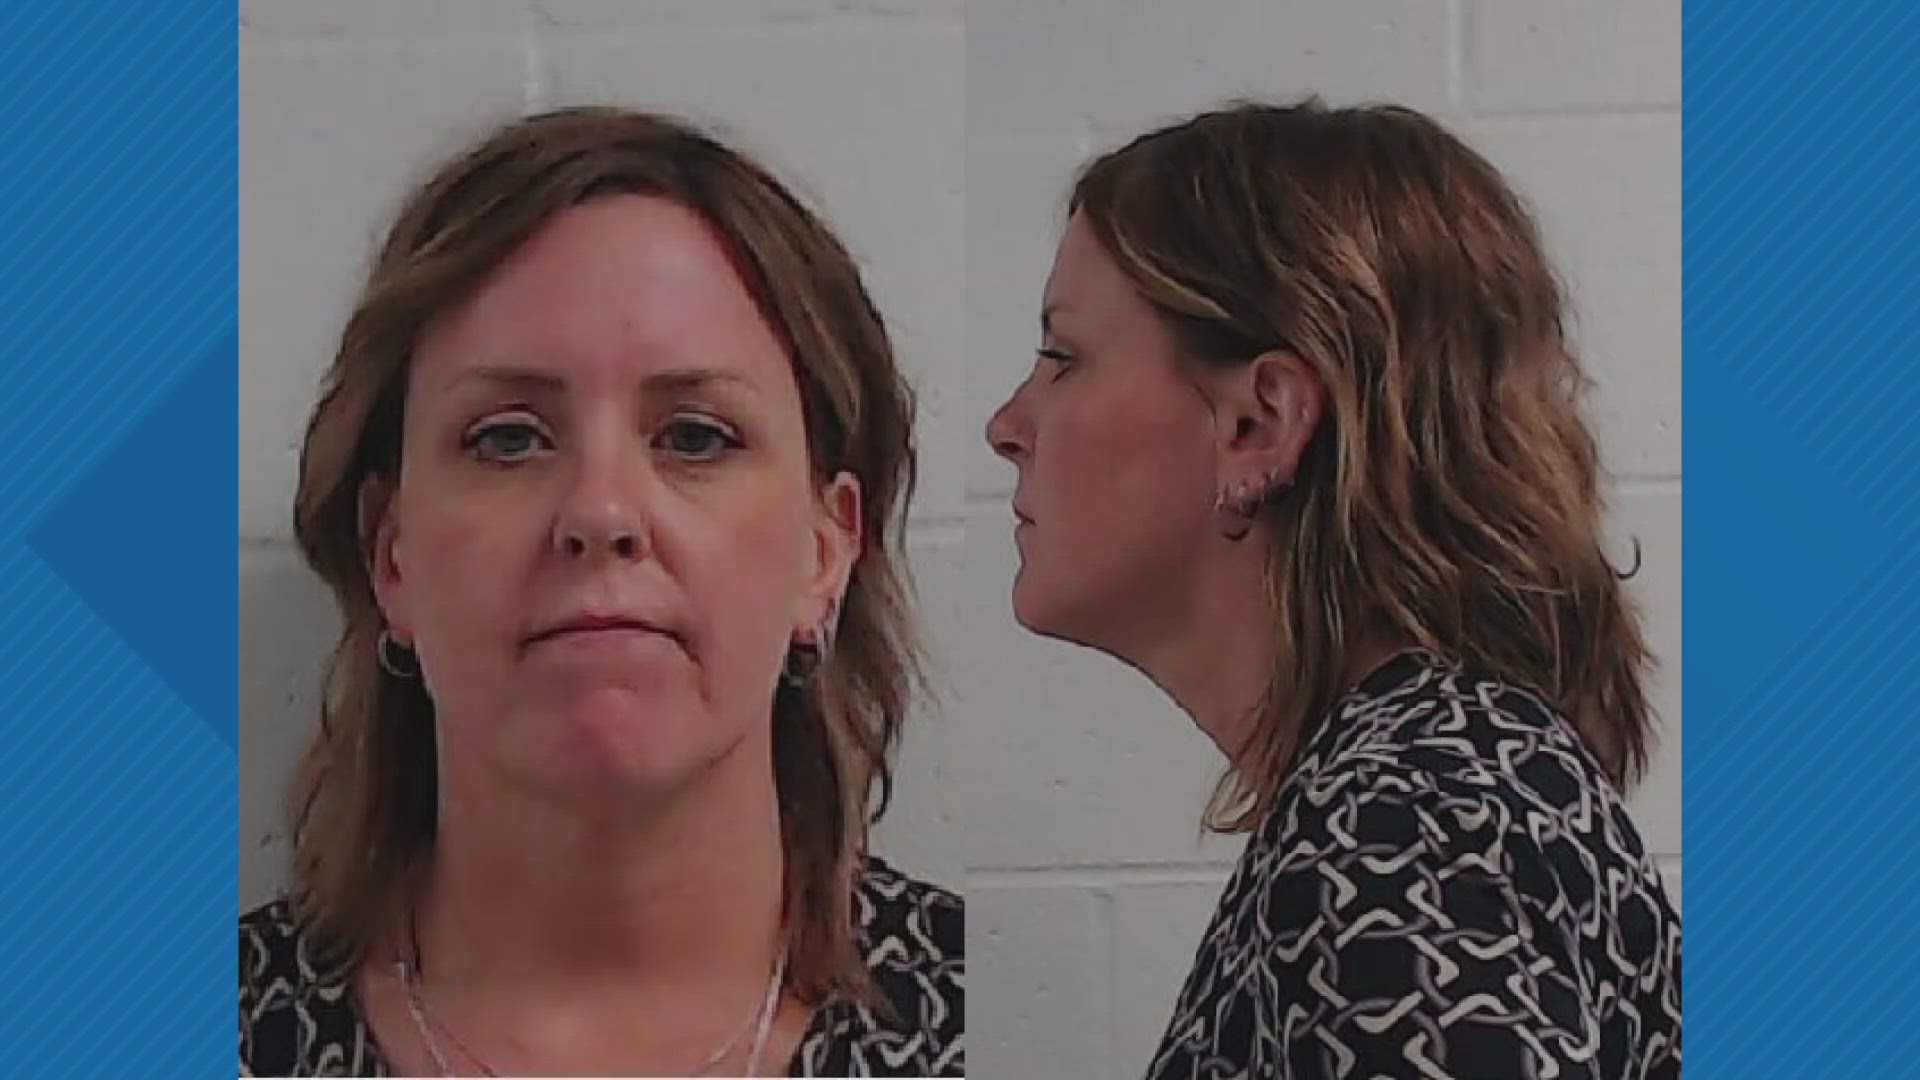 A 50-year-old woman was charged with sexual assault after police said she has sexual contact with a student. She worked as an assistant principal.